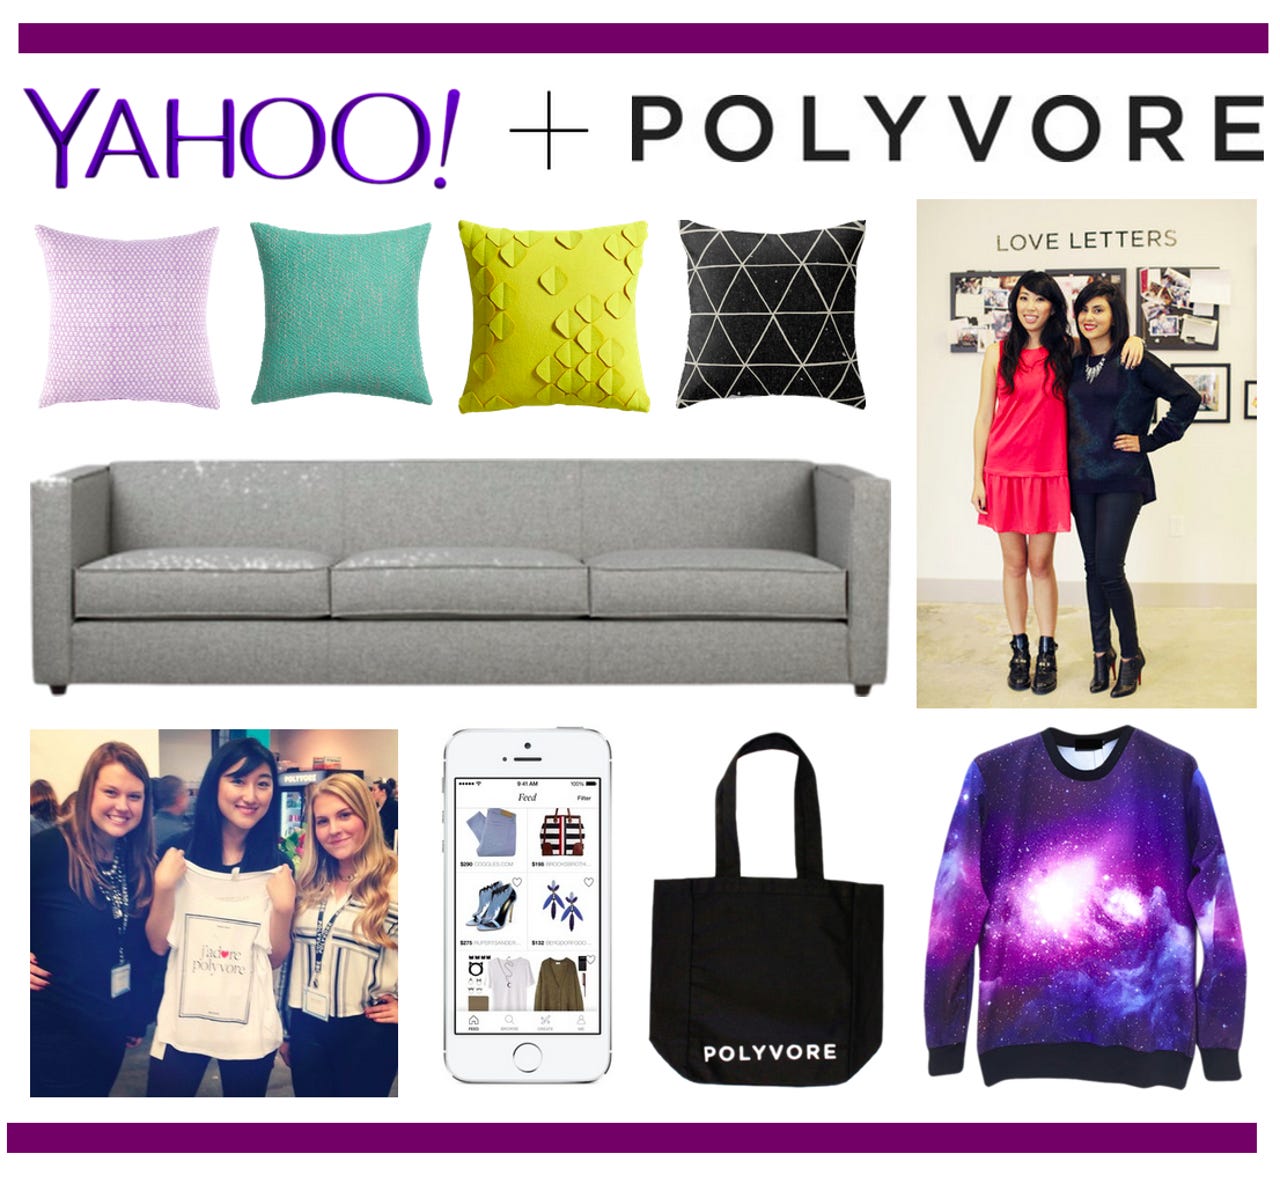 zdnet-yahoo-polyvore.png